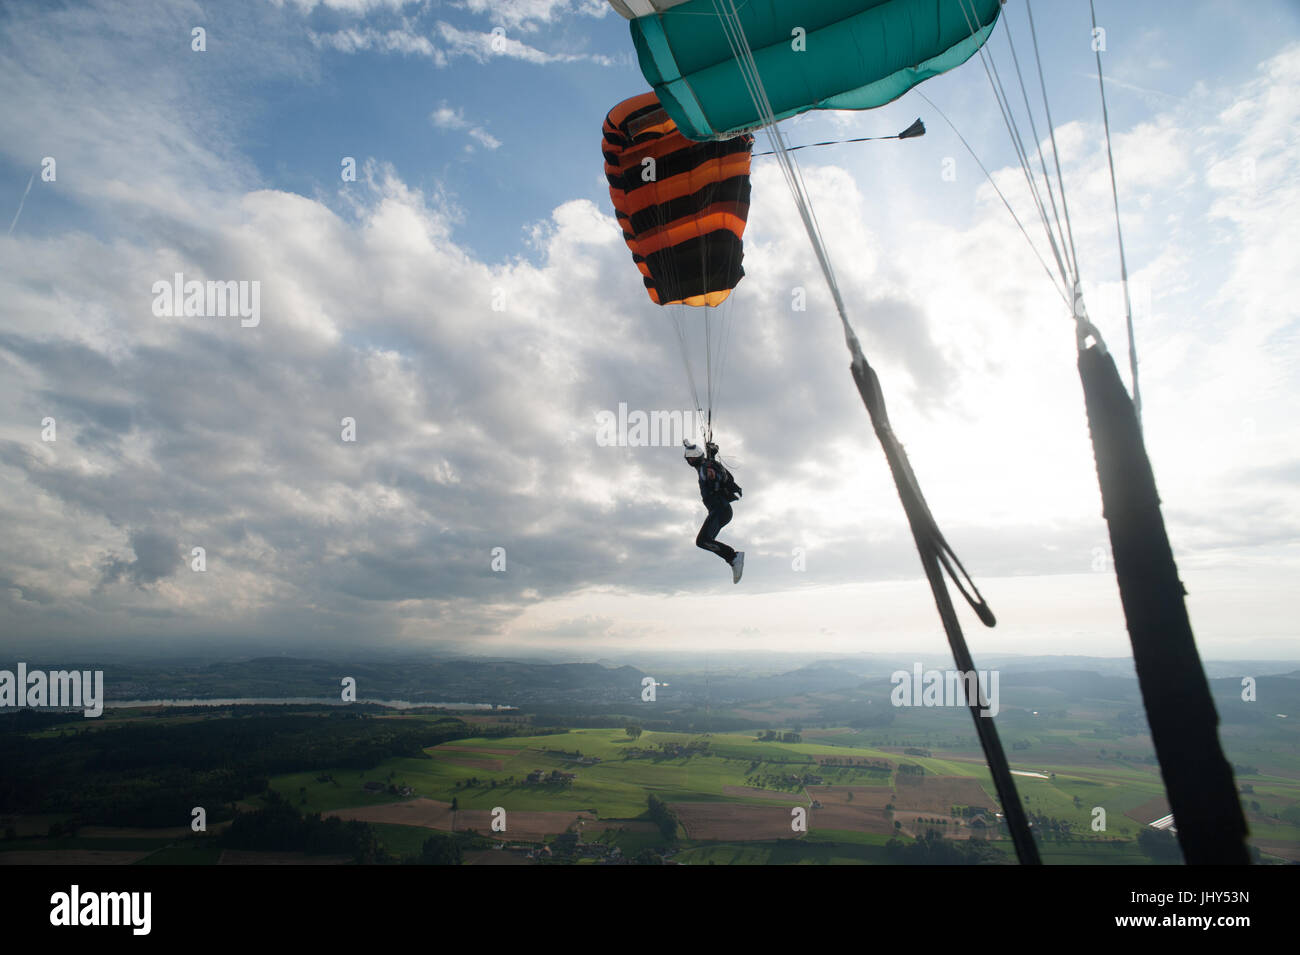 Skydiver flying towards the landing zone at Beromunster airport in Switzerland Stock Photo